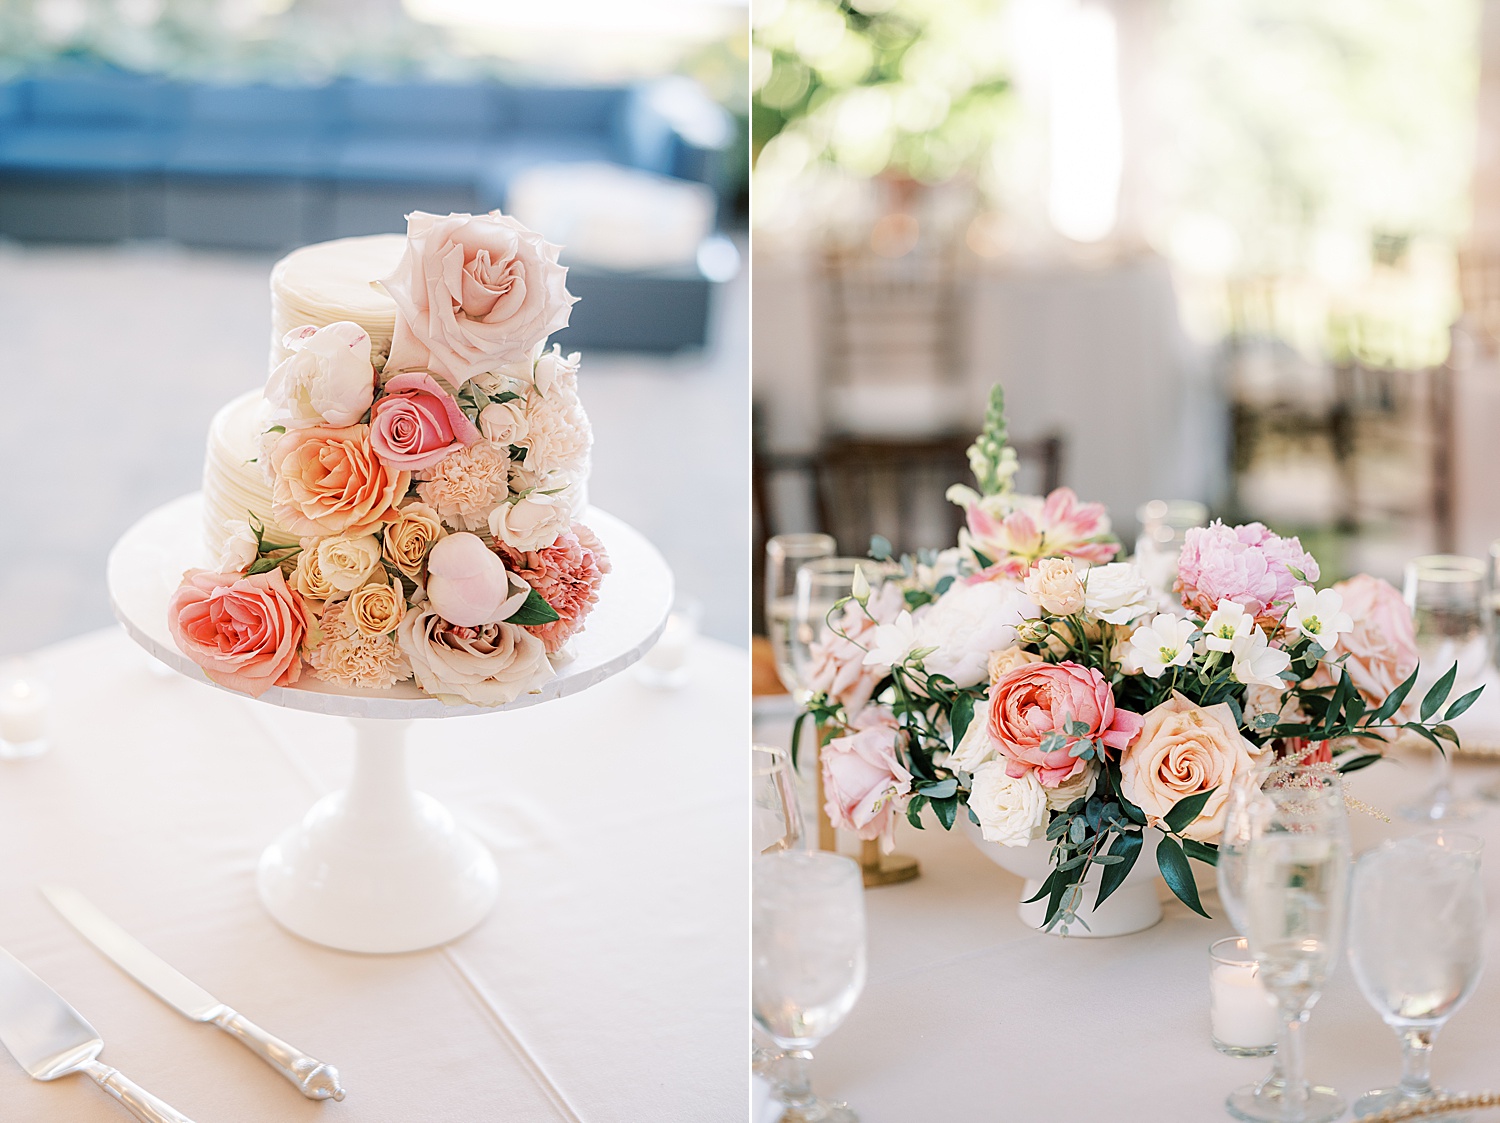 wedding cake with pink and orange roses at Glen Foerd on the Delaware